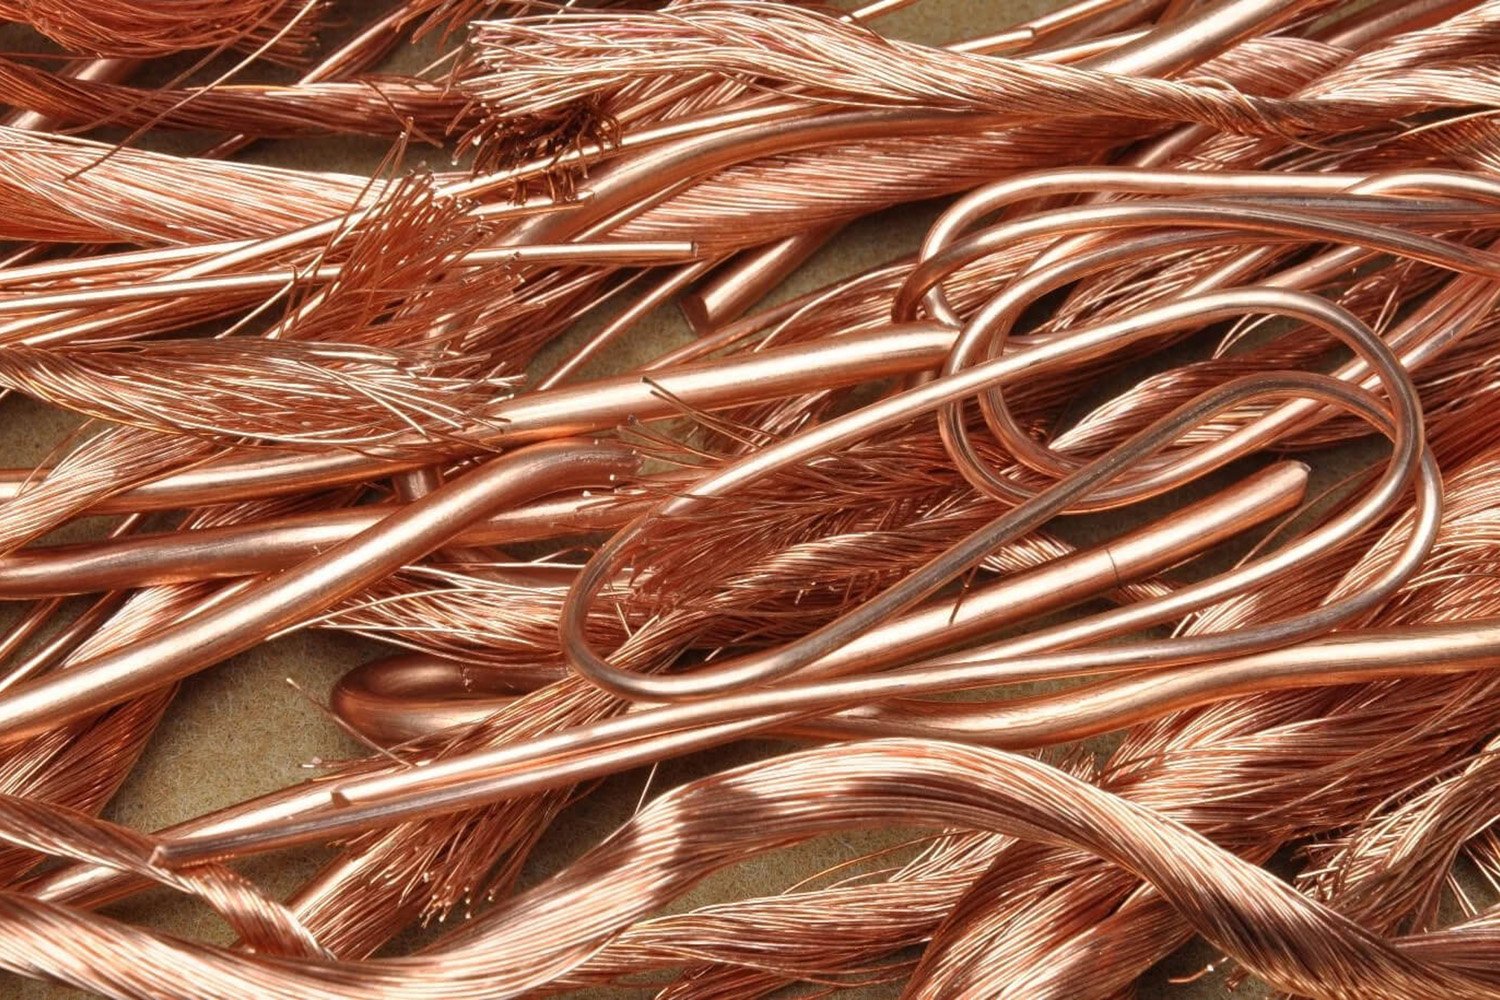 Choosing stranded vs. solid wire for cabling